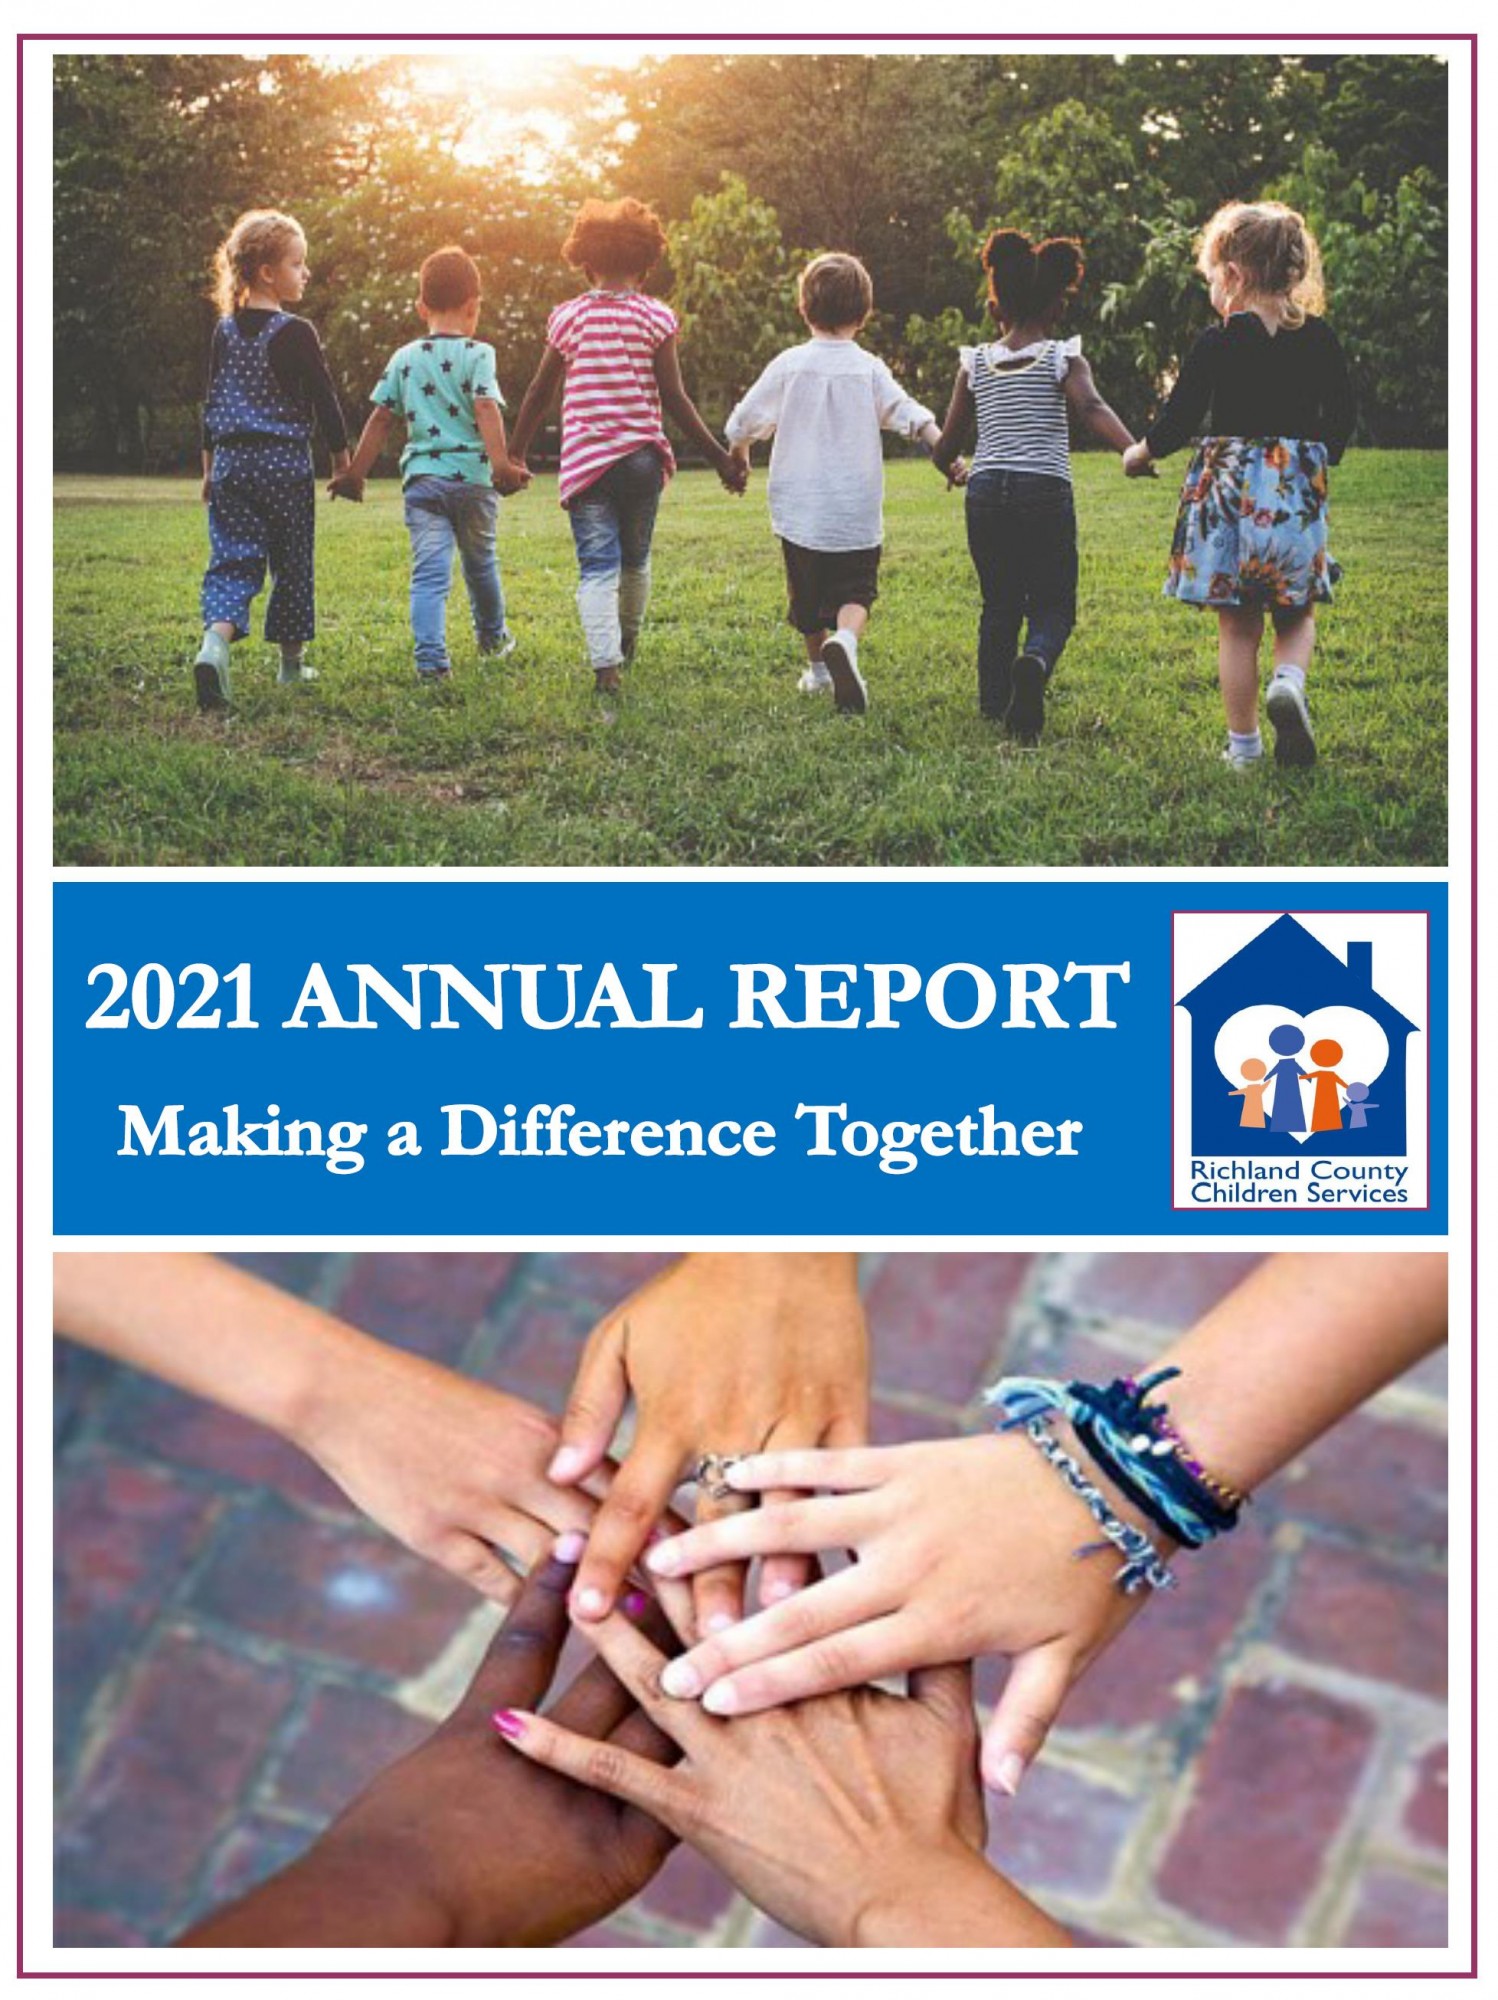 RCCS Releases 2021 Annual Report